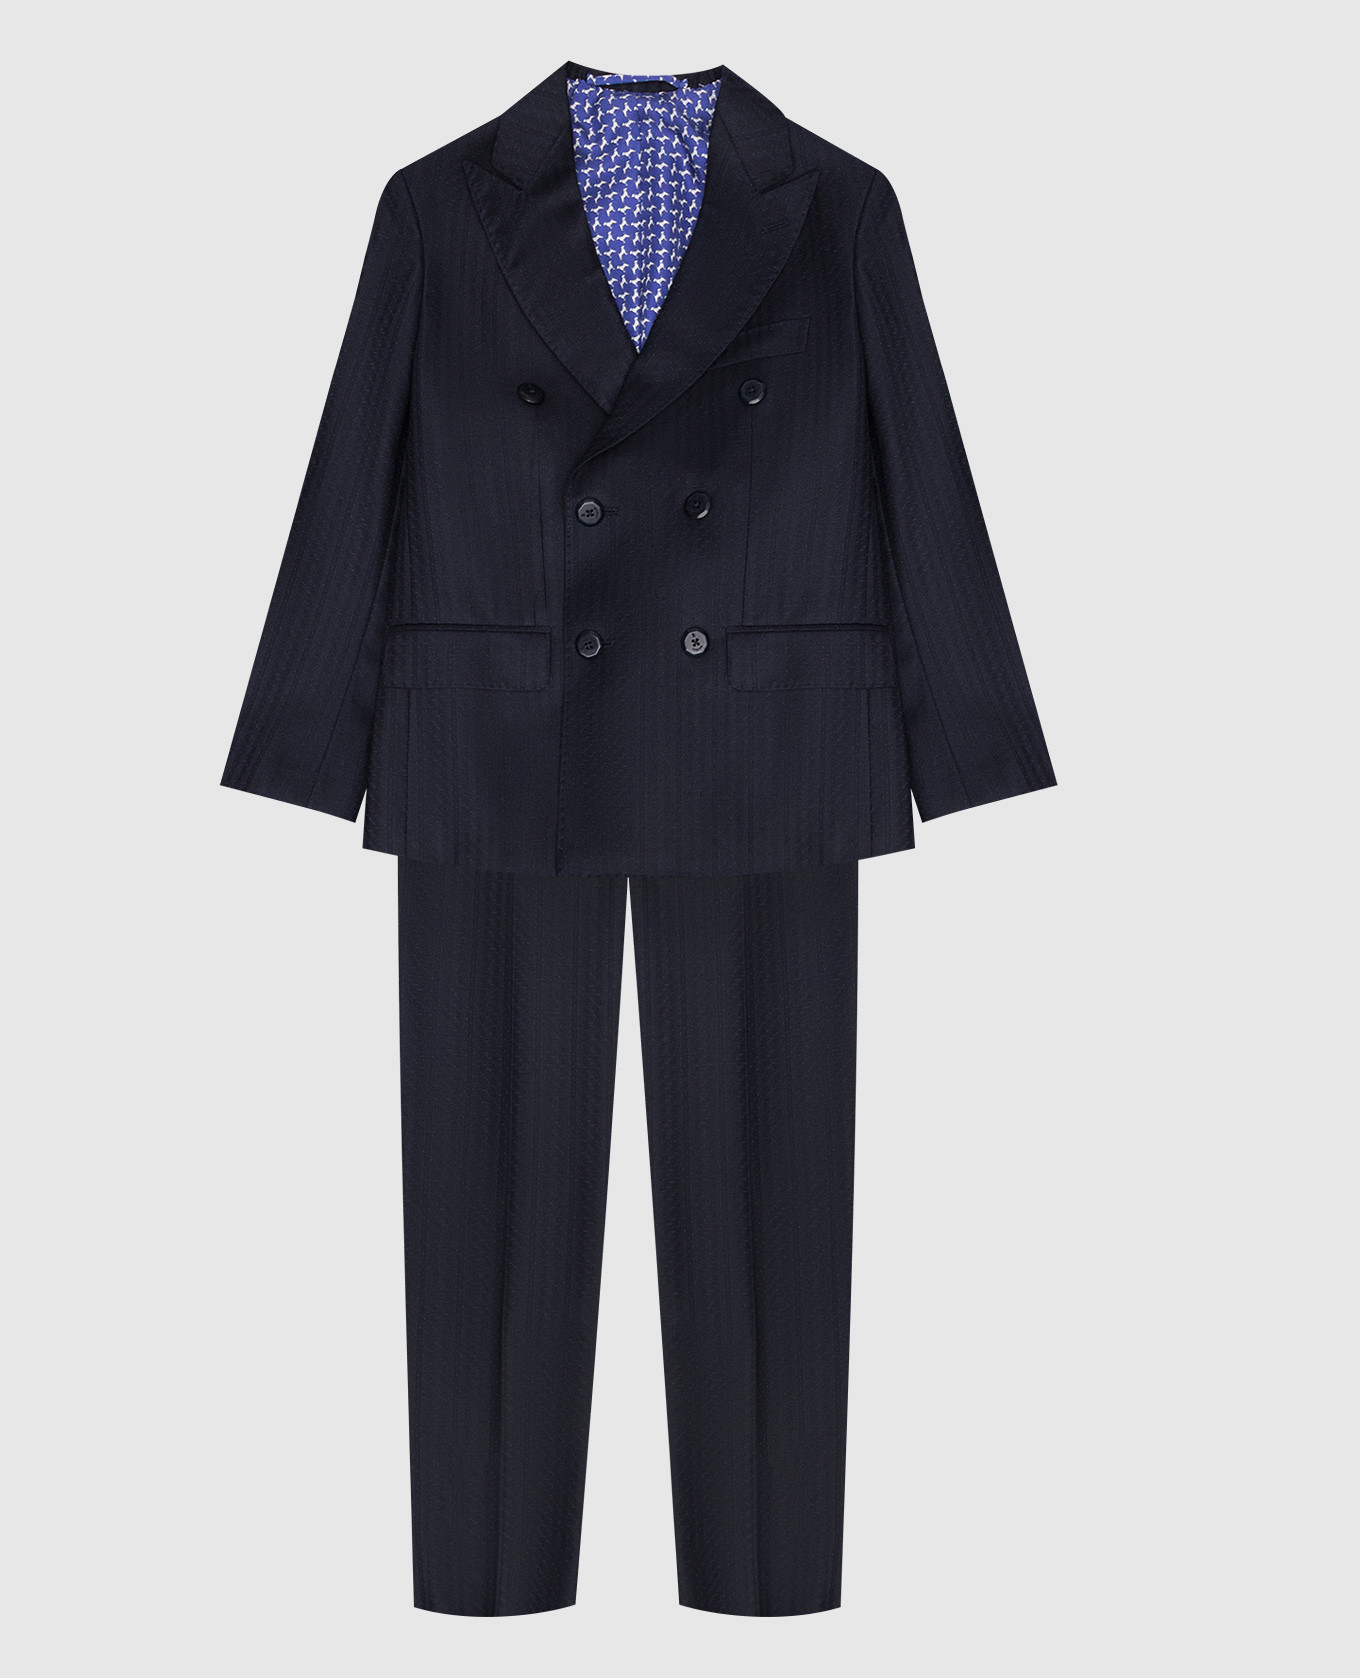 Children's blue double-breasted striped wool suit